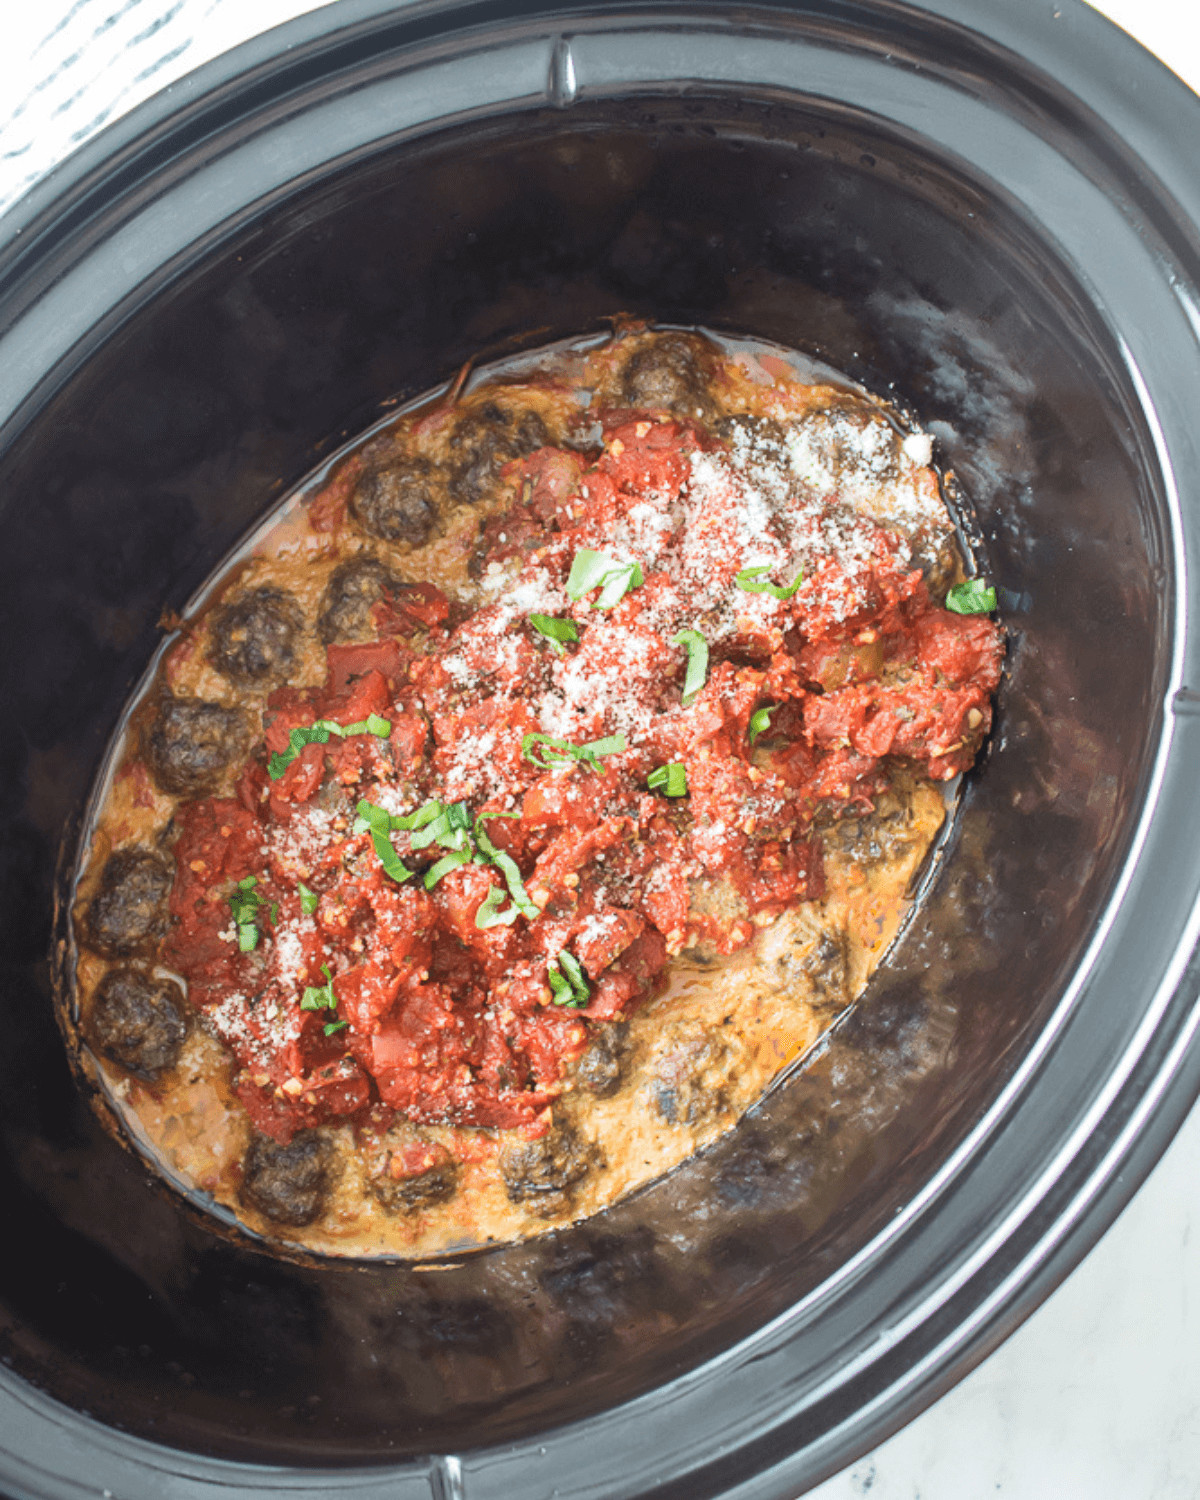 A crock pot filled with delicious meatballs and sauce.